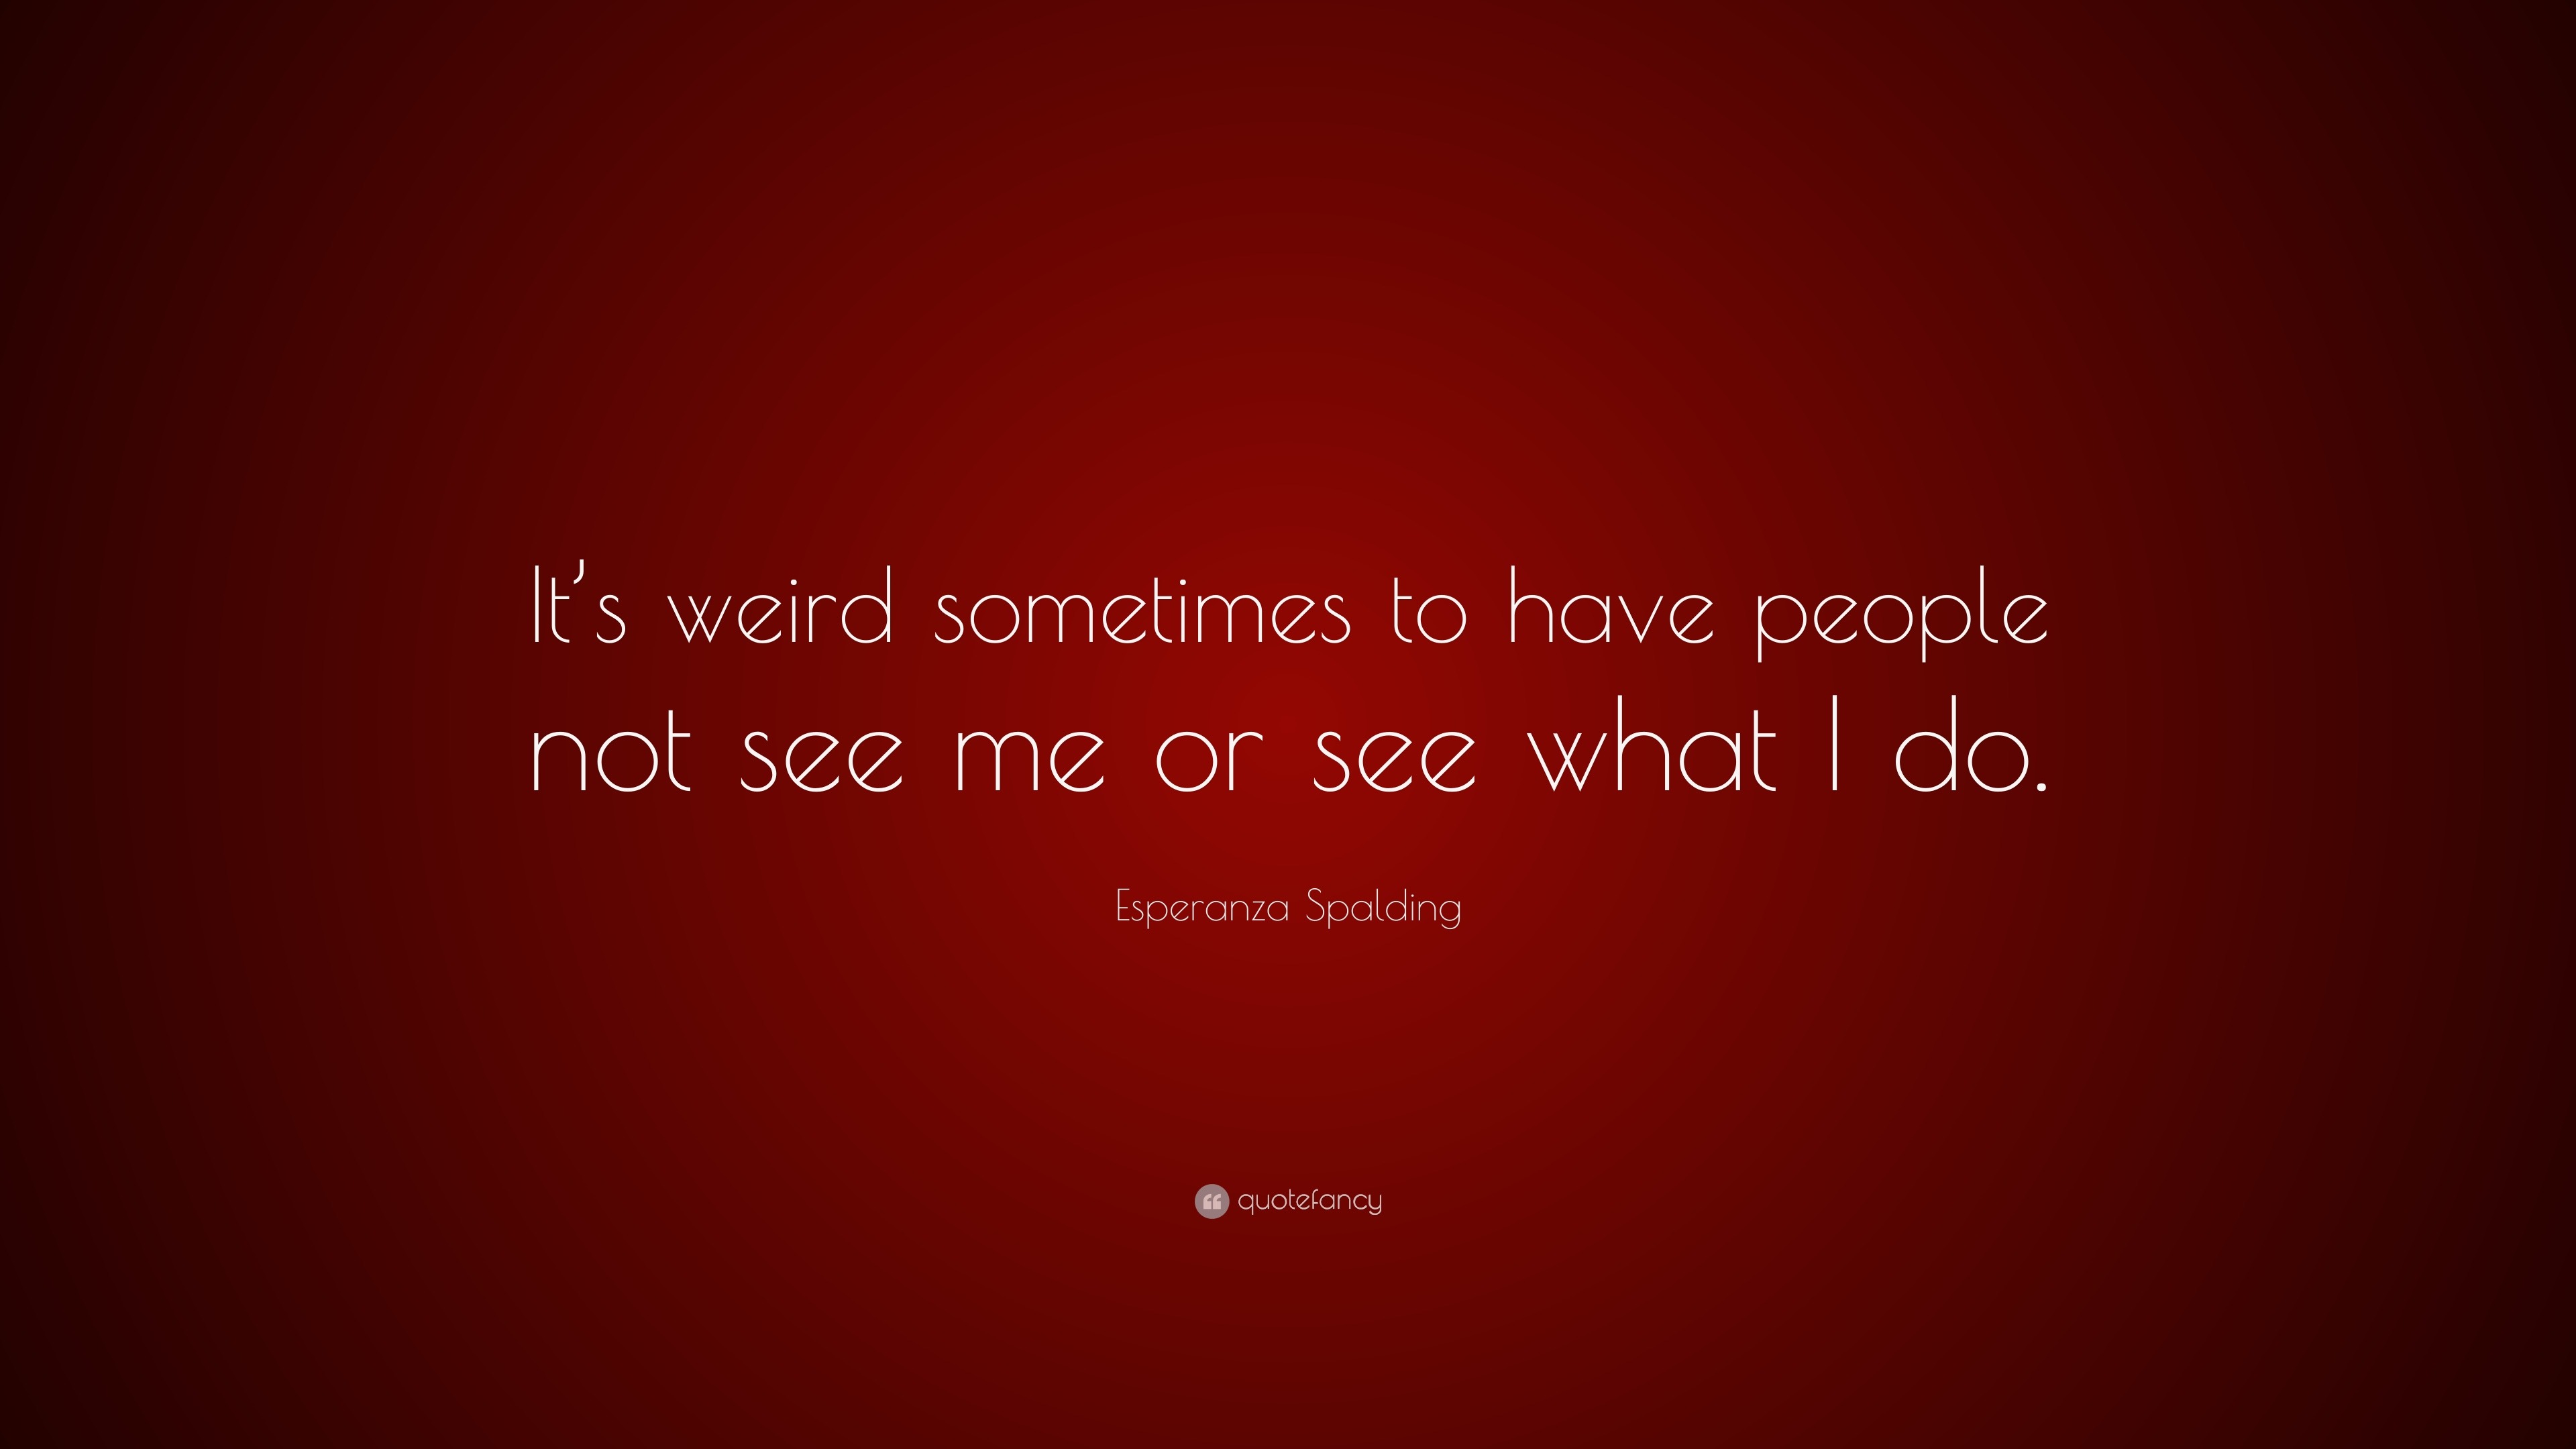 Esperanza Spalding Quote: “It’s weird sometimes to have people not see ...